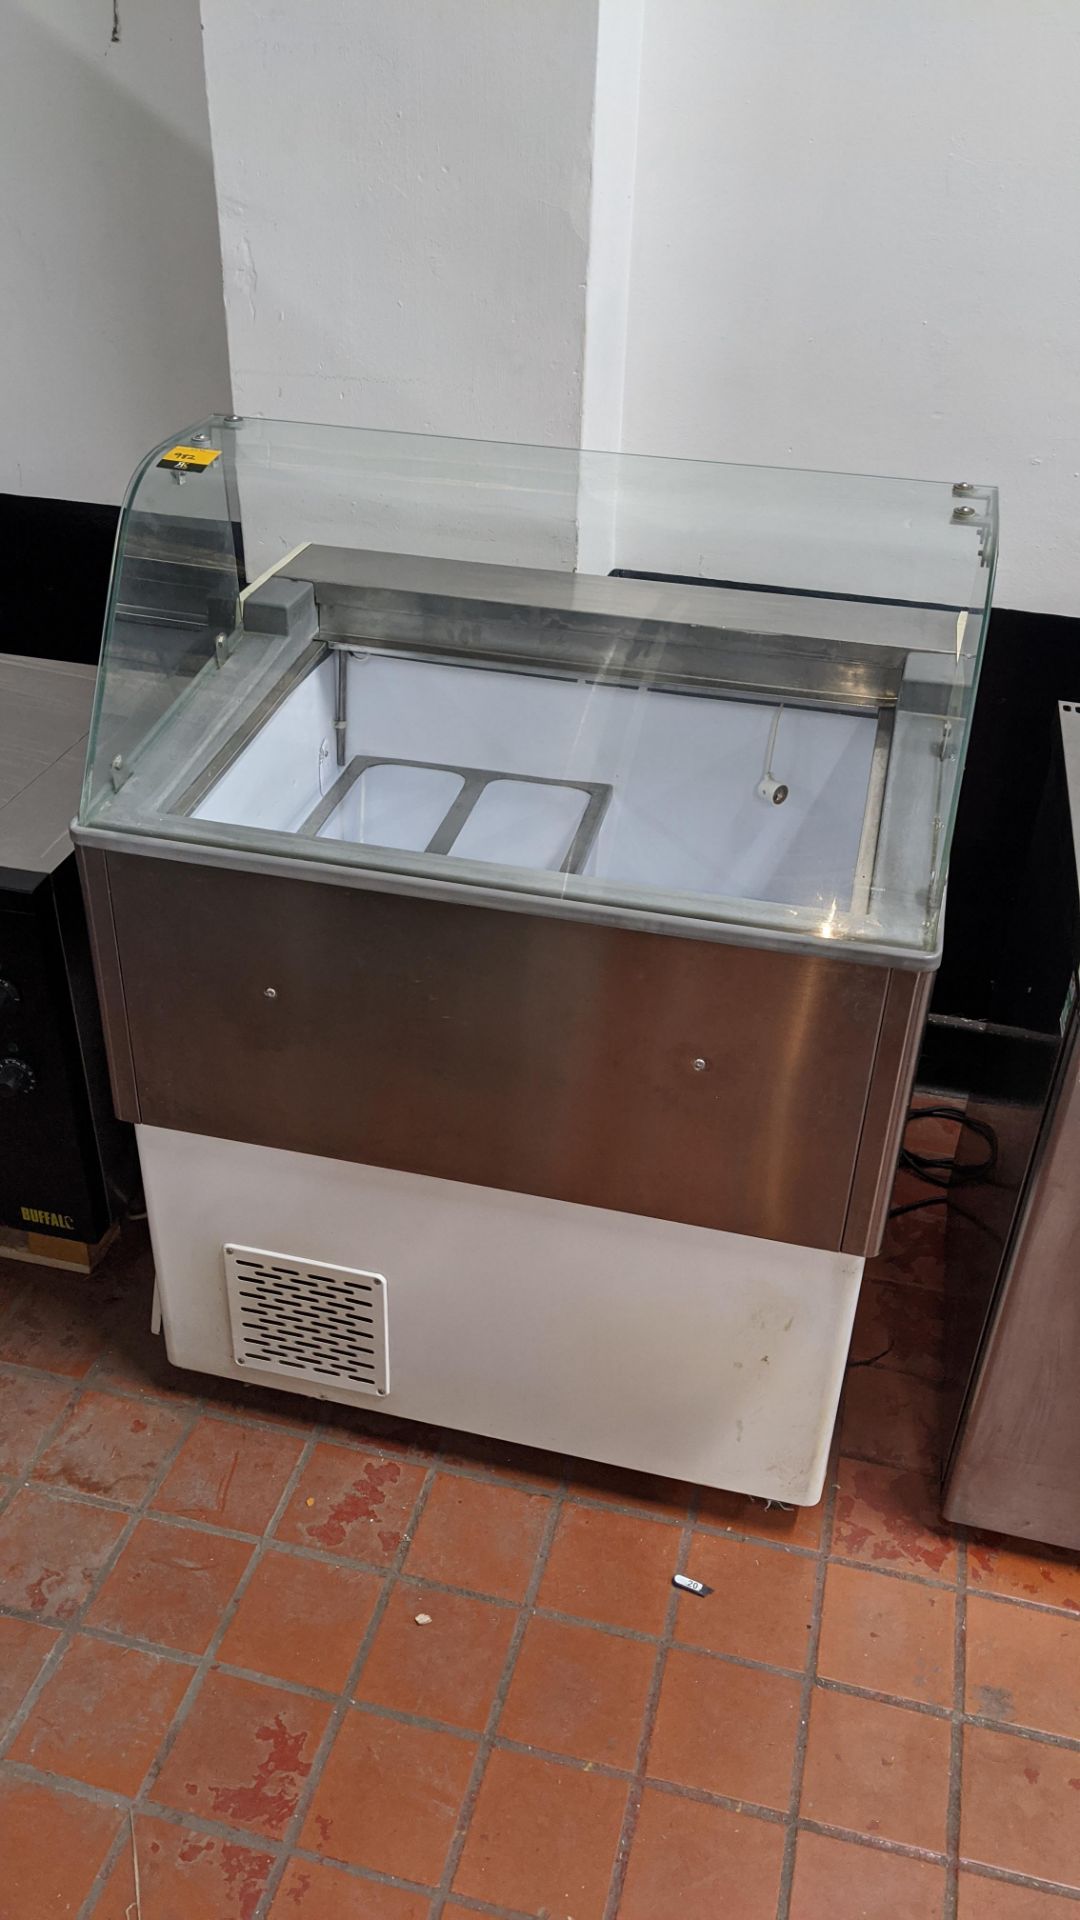 Ice cream retail serving counter - model 00129. IMPORTANT: Please remember goods successfully bid - Image 2 of 6